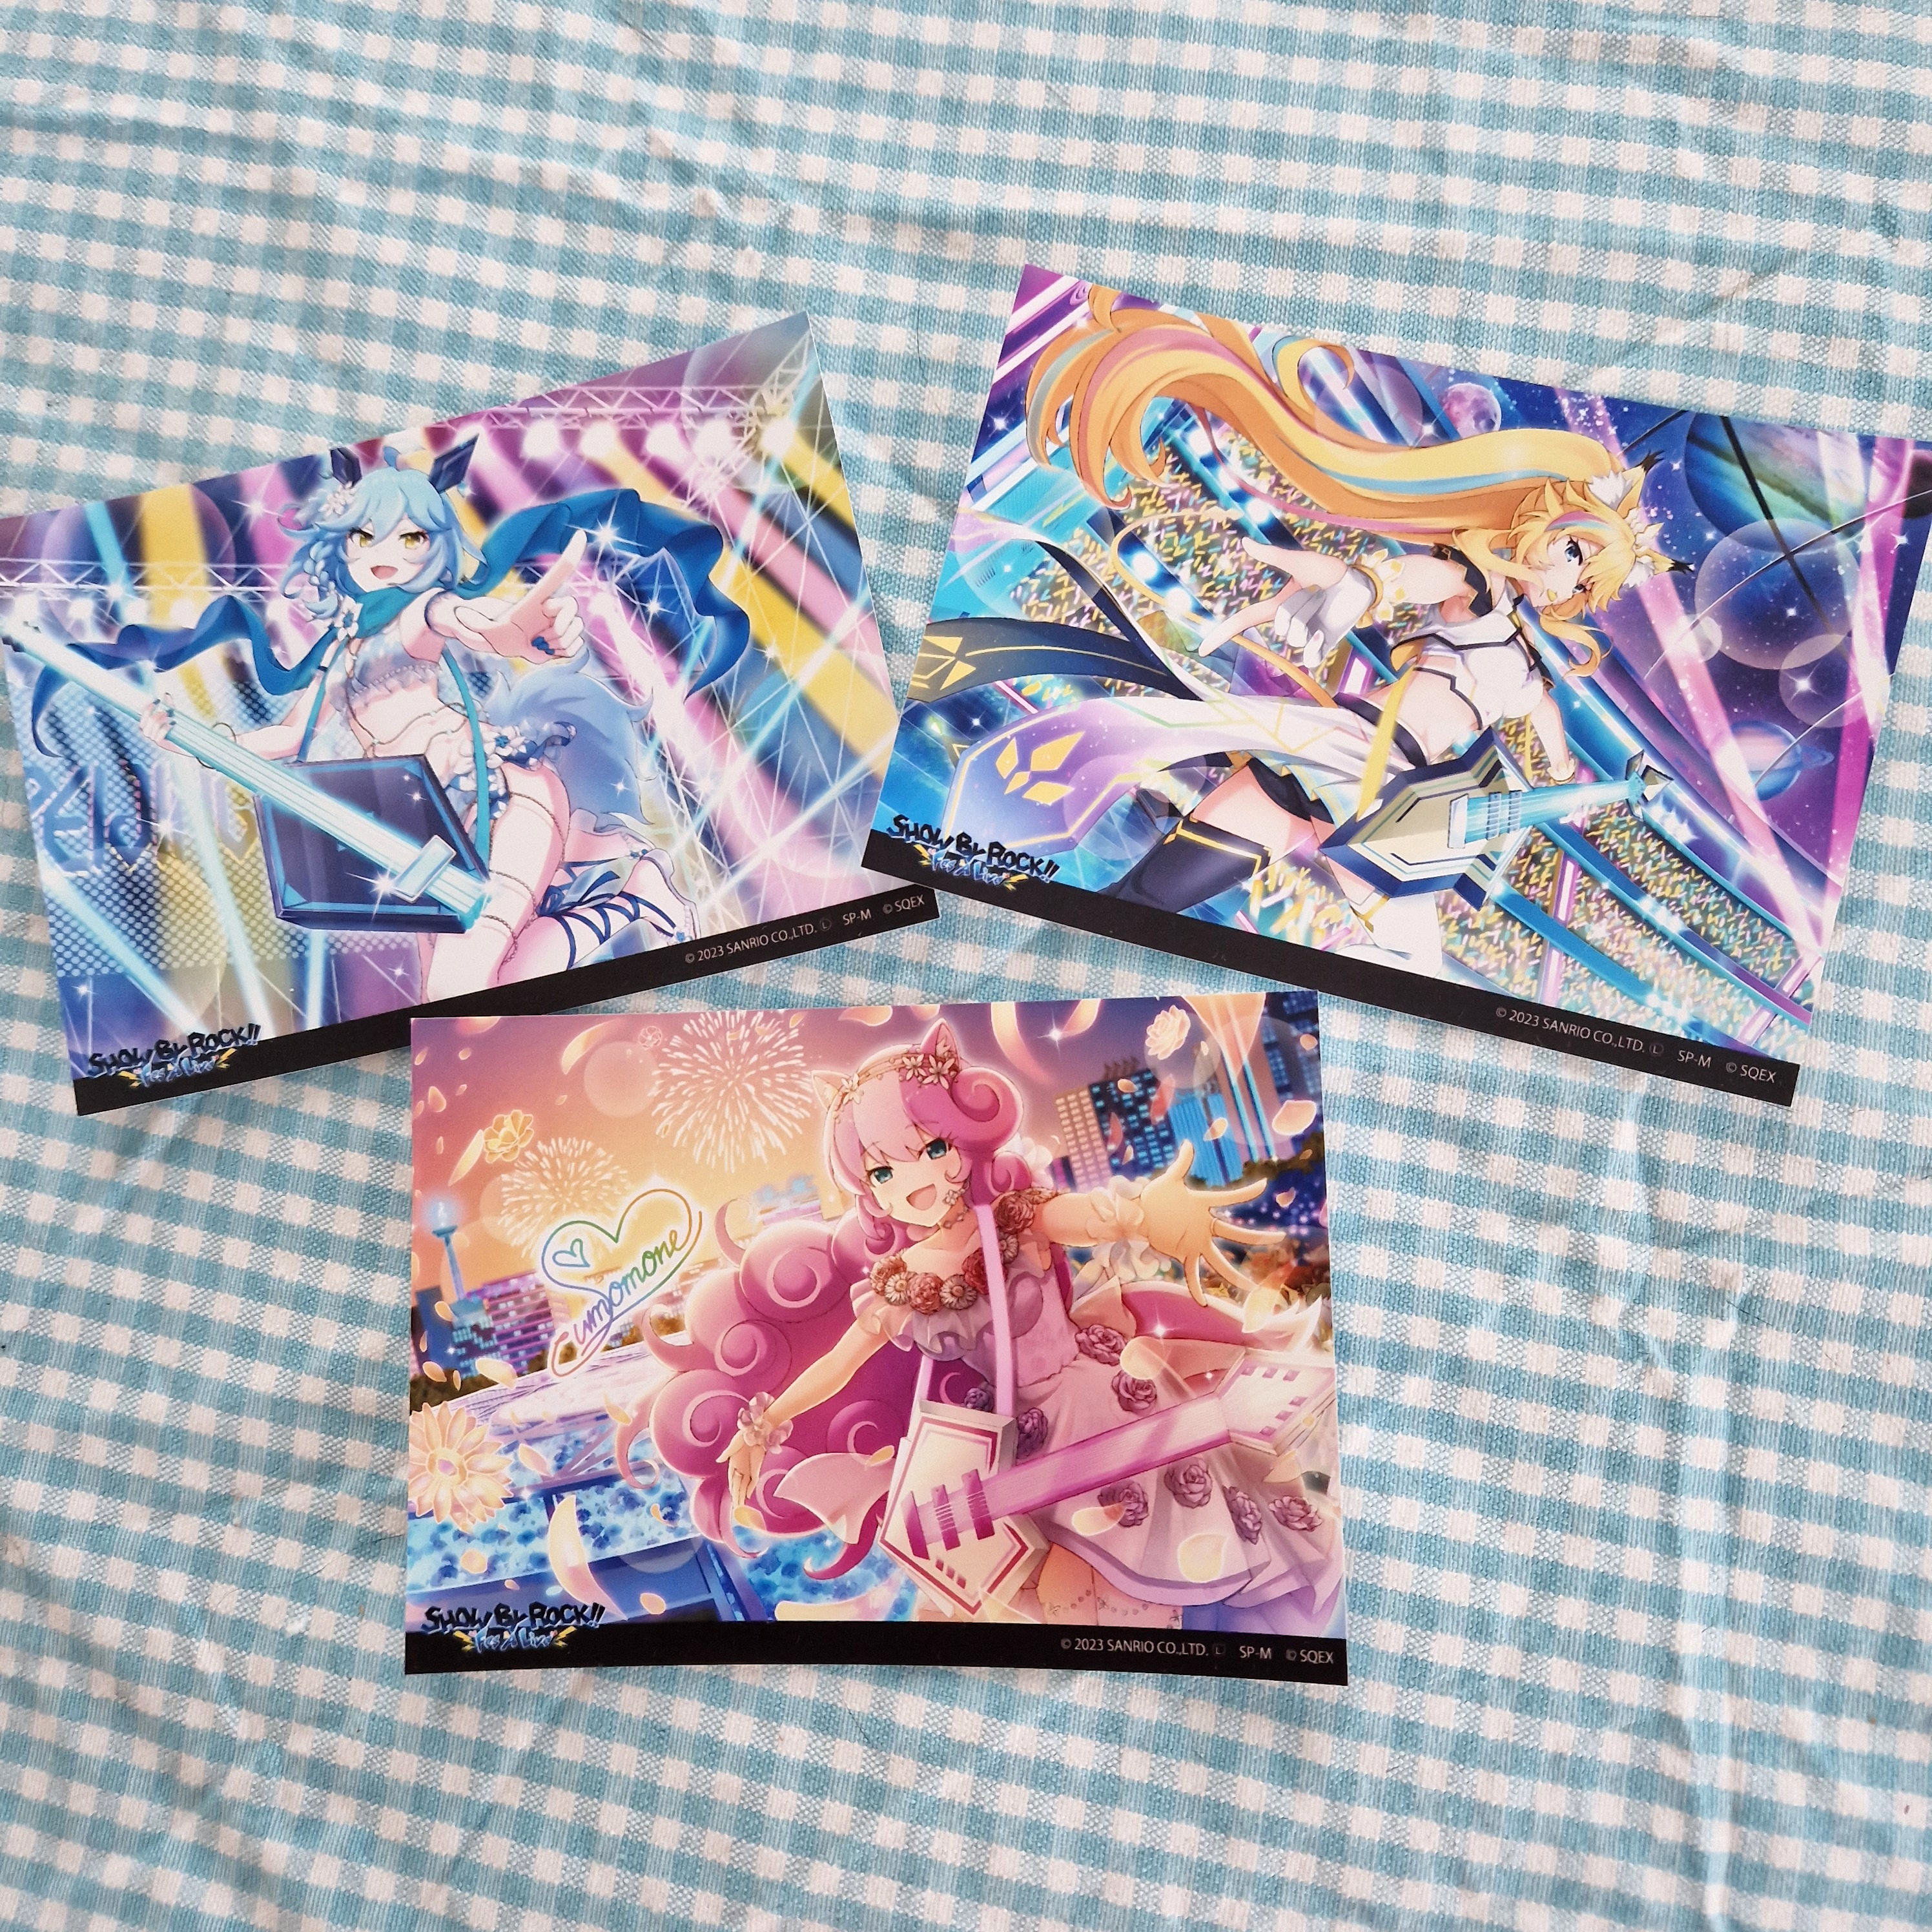 Three postcards of the members of Reijing Signal from Show By Rcok. Uiui on the left, Rararin on the right, Sumomone on the bottom.